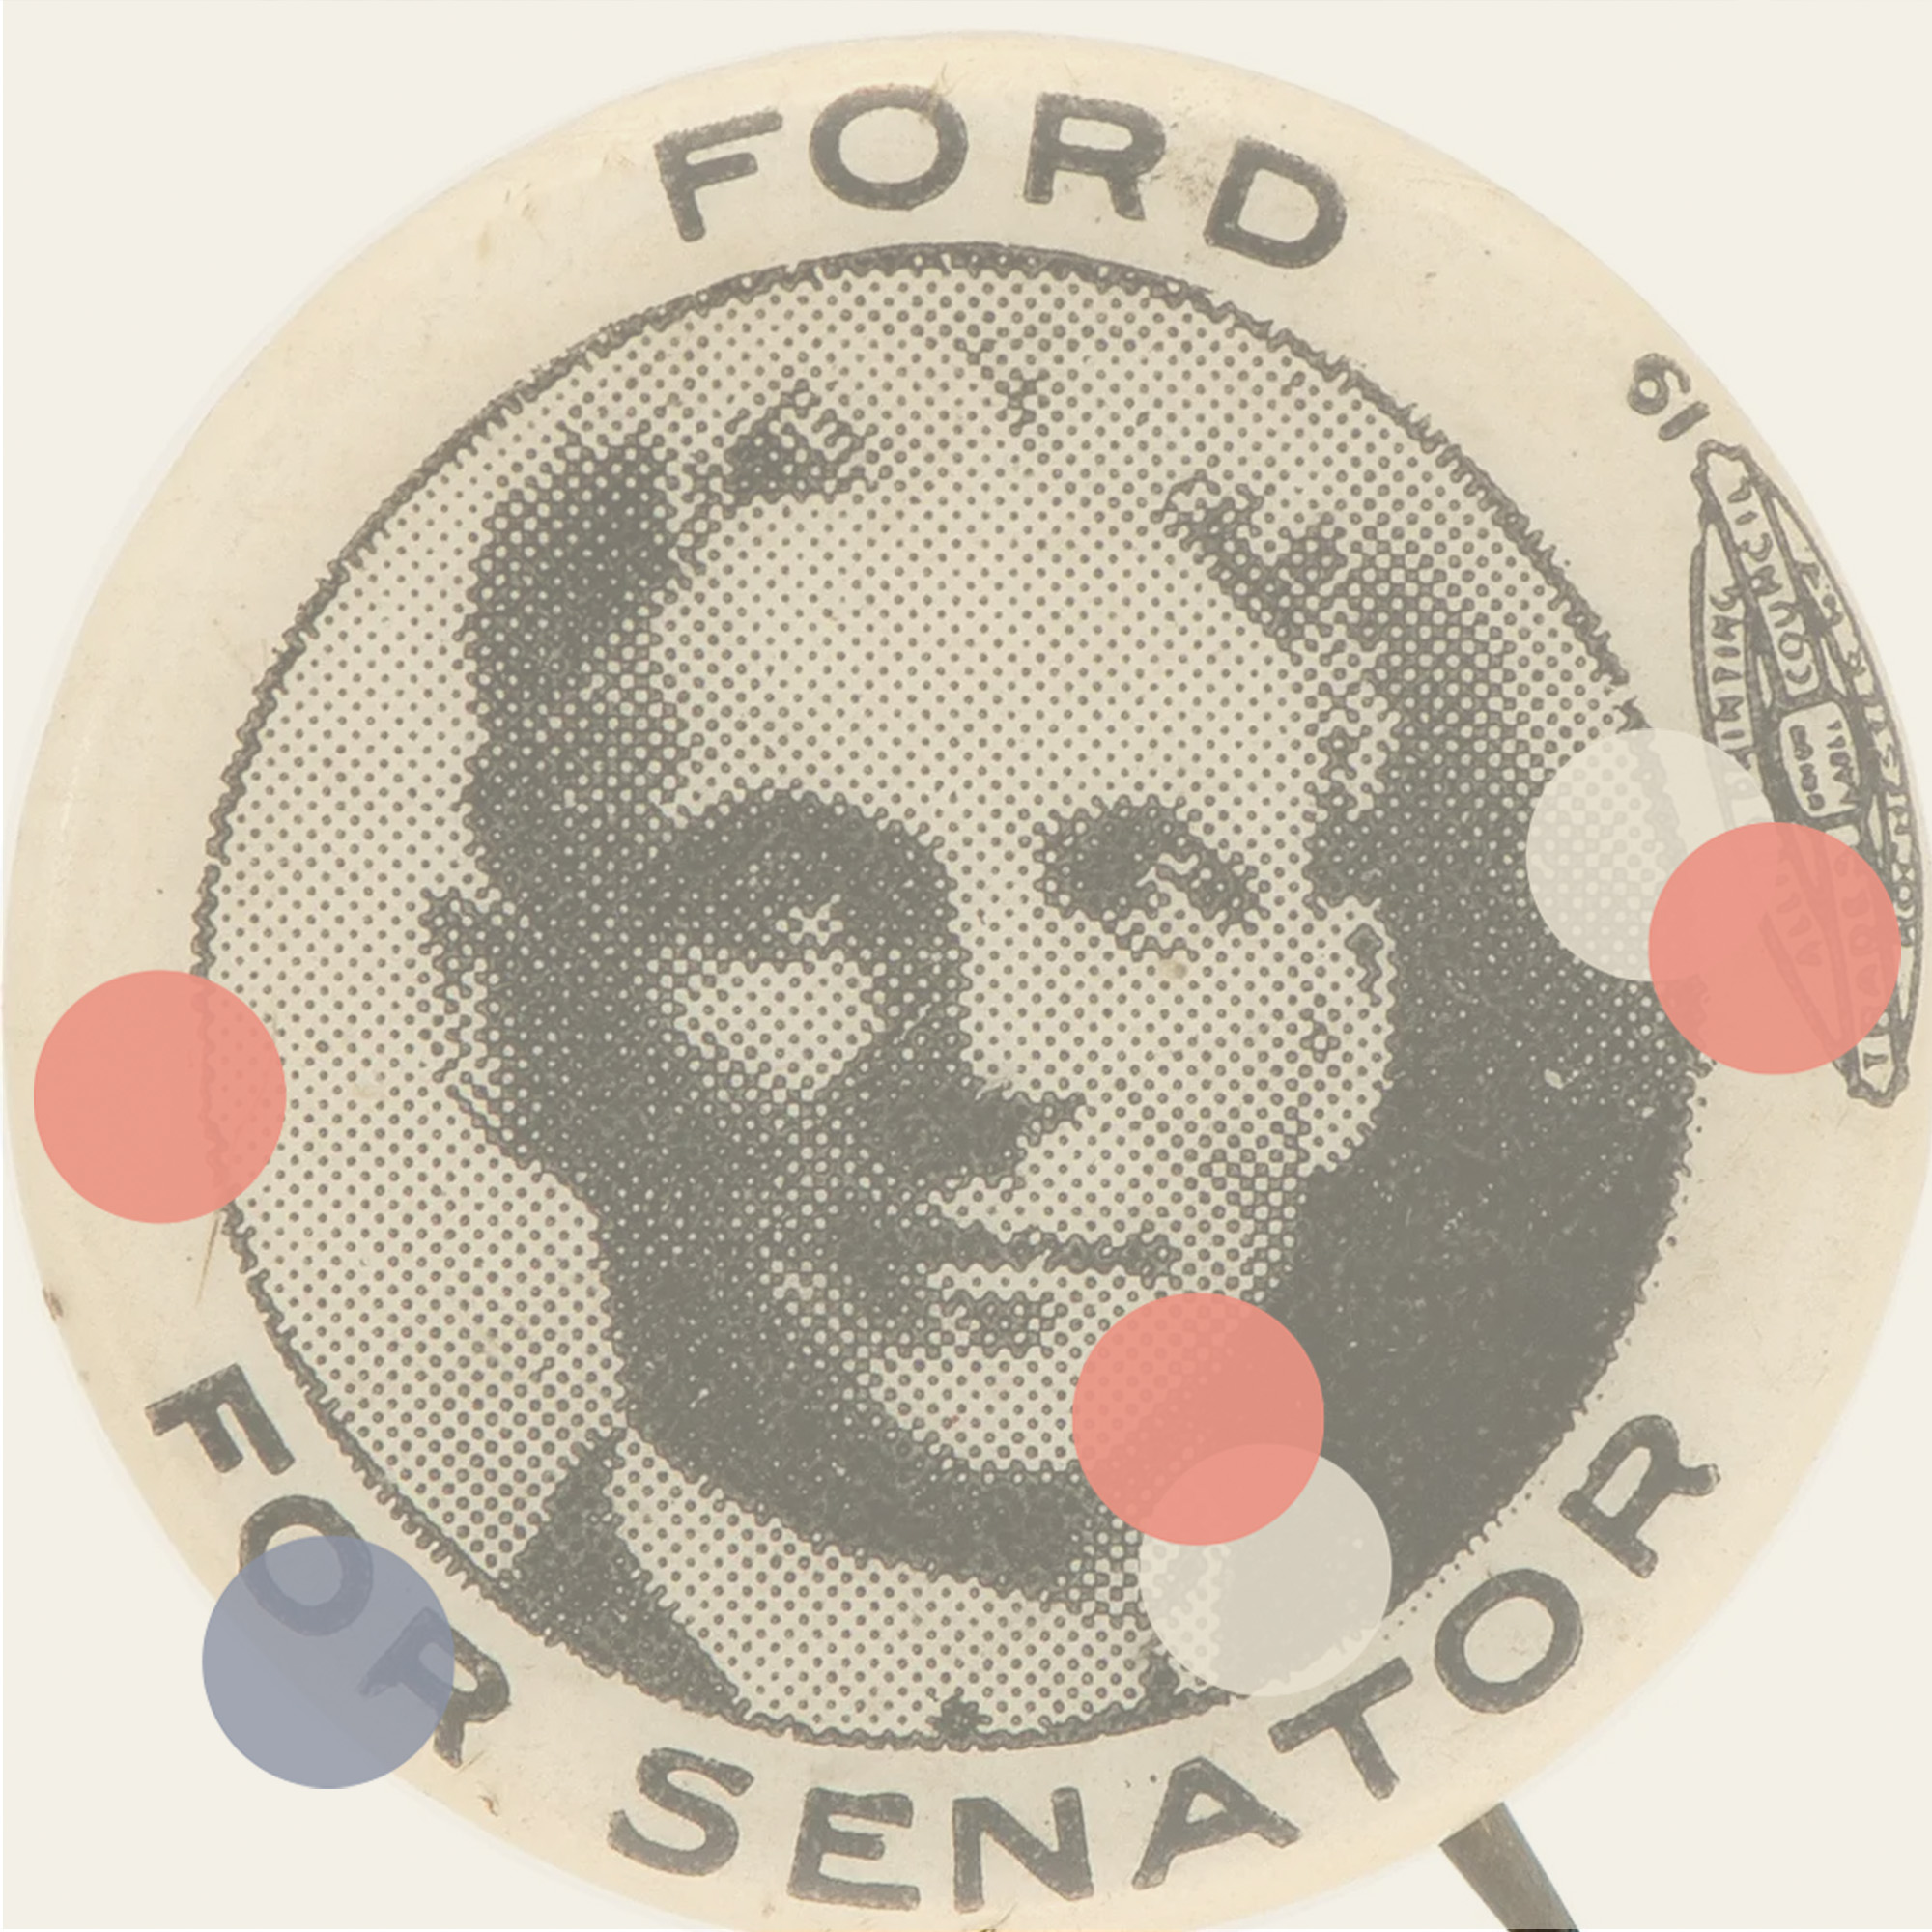 Henry Ford Contests An Election (1918)